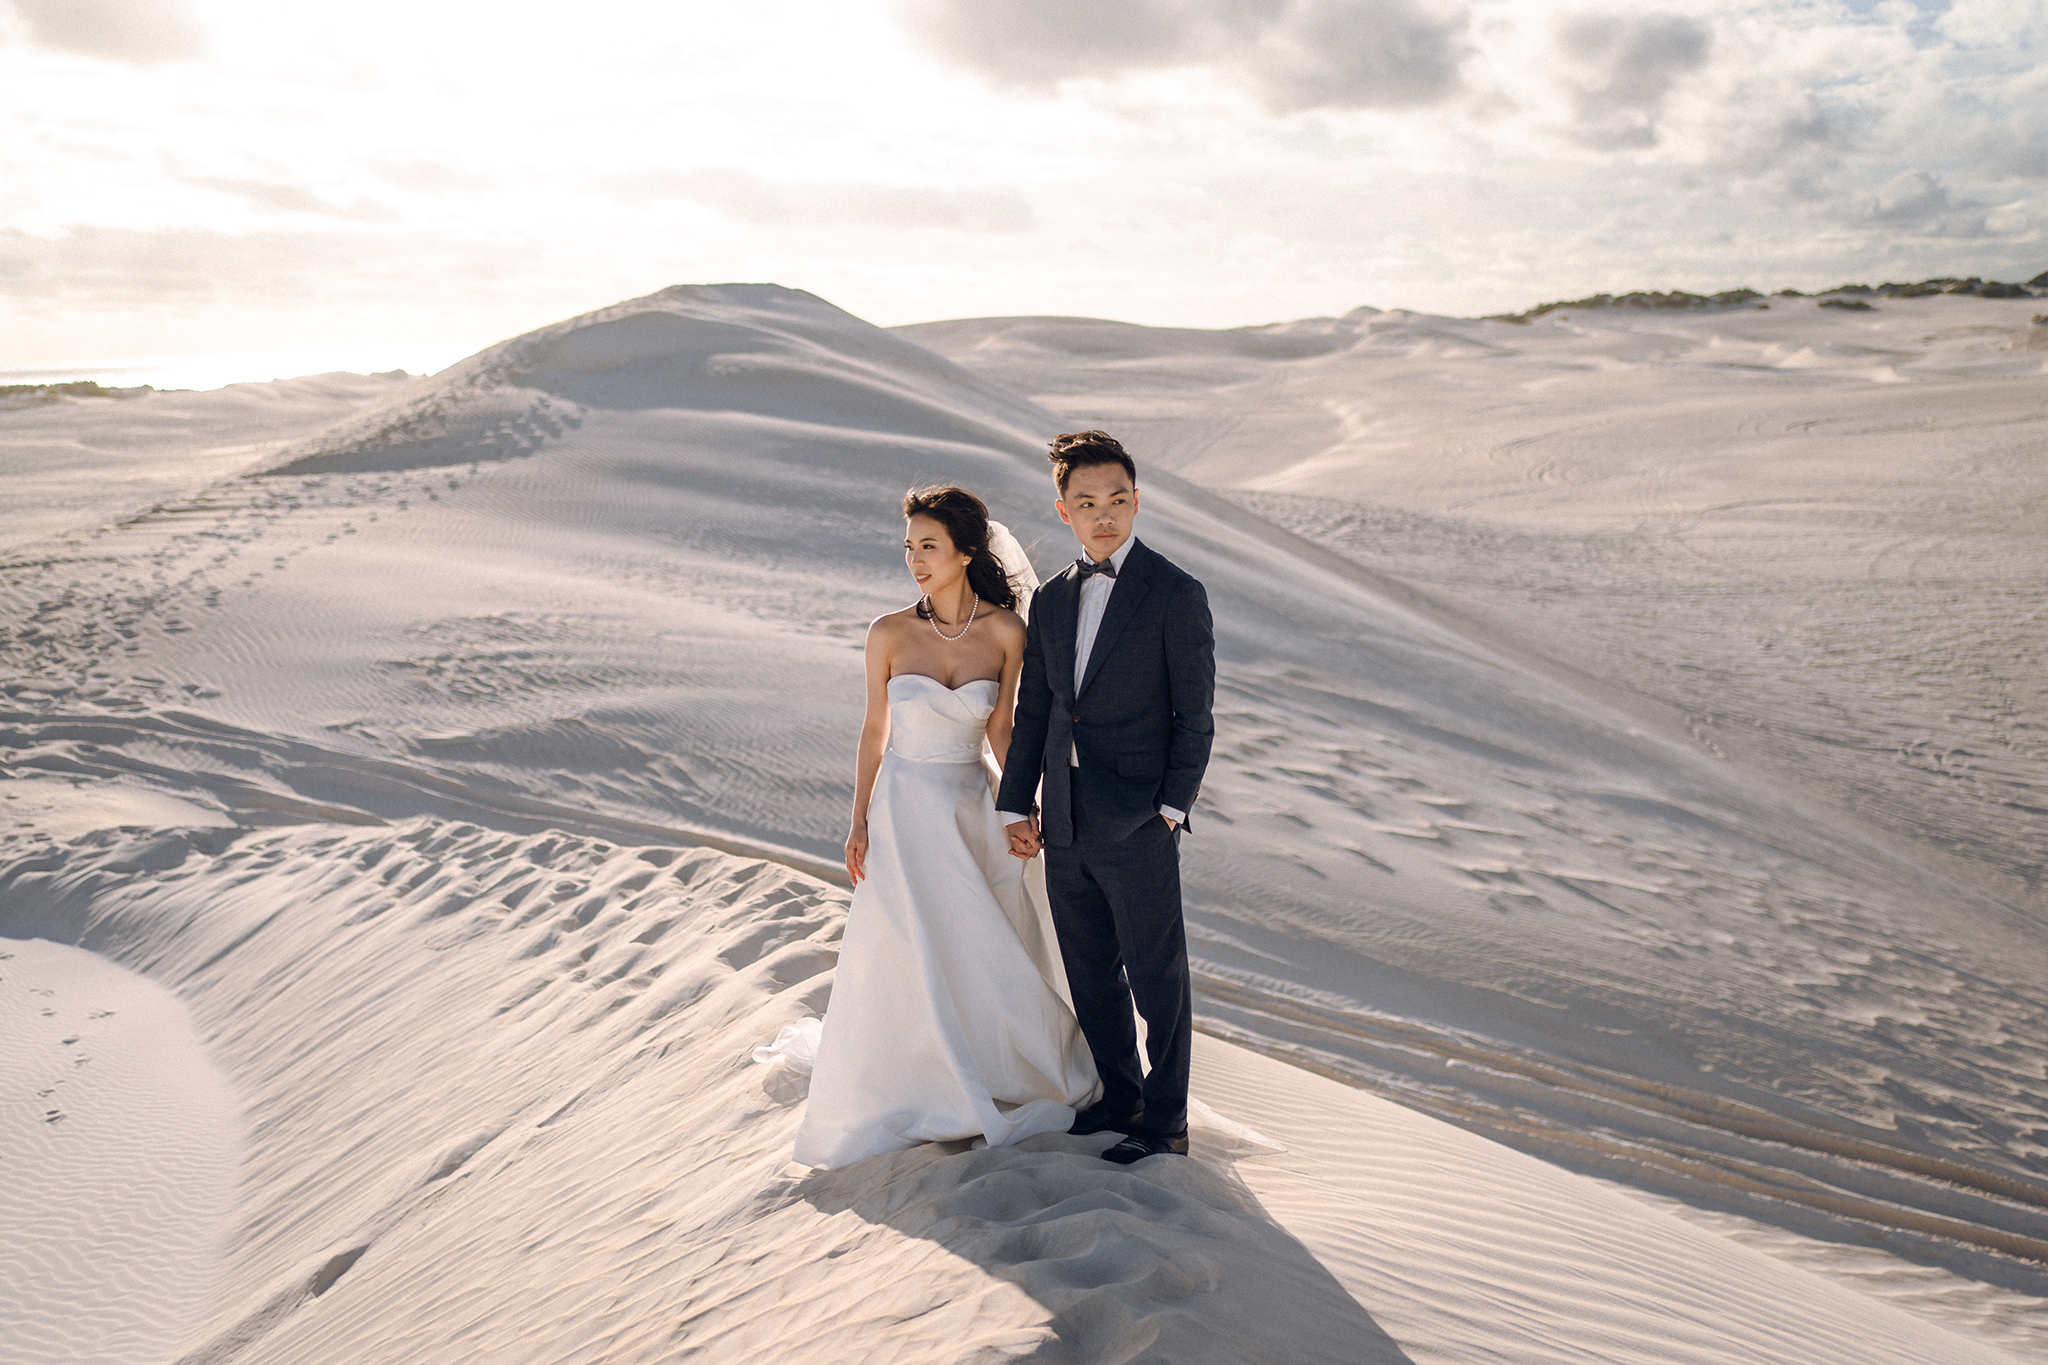 Perth Pre-Wedding Photoshoot at Lancelin Desert & Bells Lookout by Jimmy on OneThreeOneFour 21